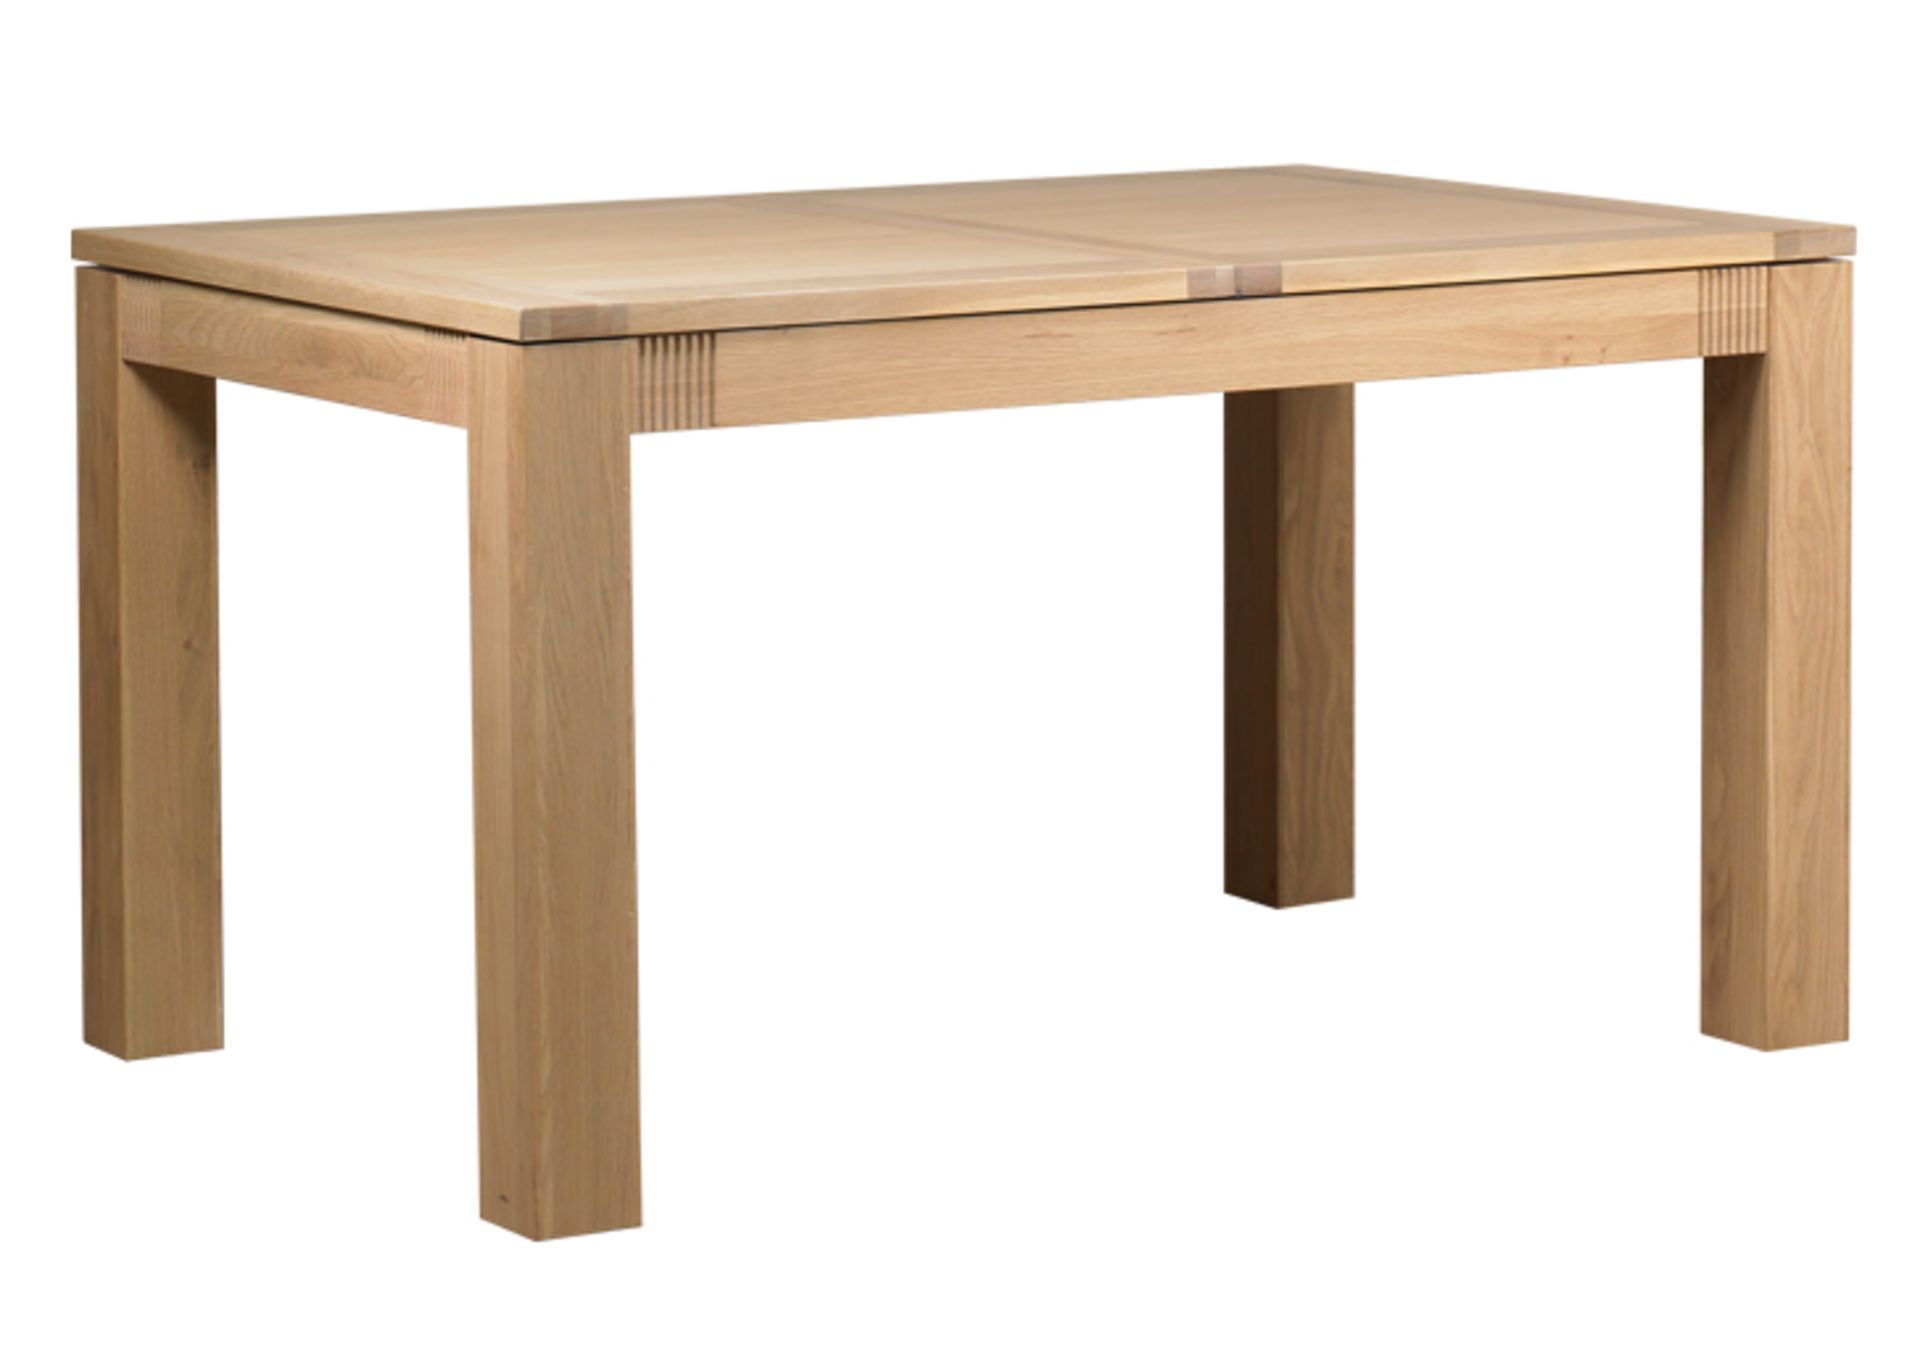 1 x Mark Webster Buckingham Small Extending Dining Table and Four High Back Chairs  - White Wash Oak - Image 6 of 9